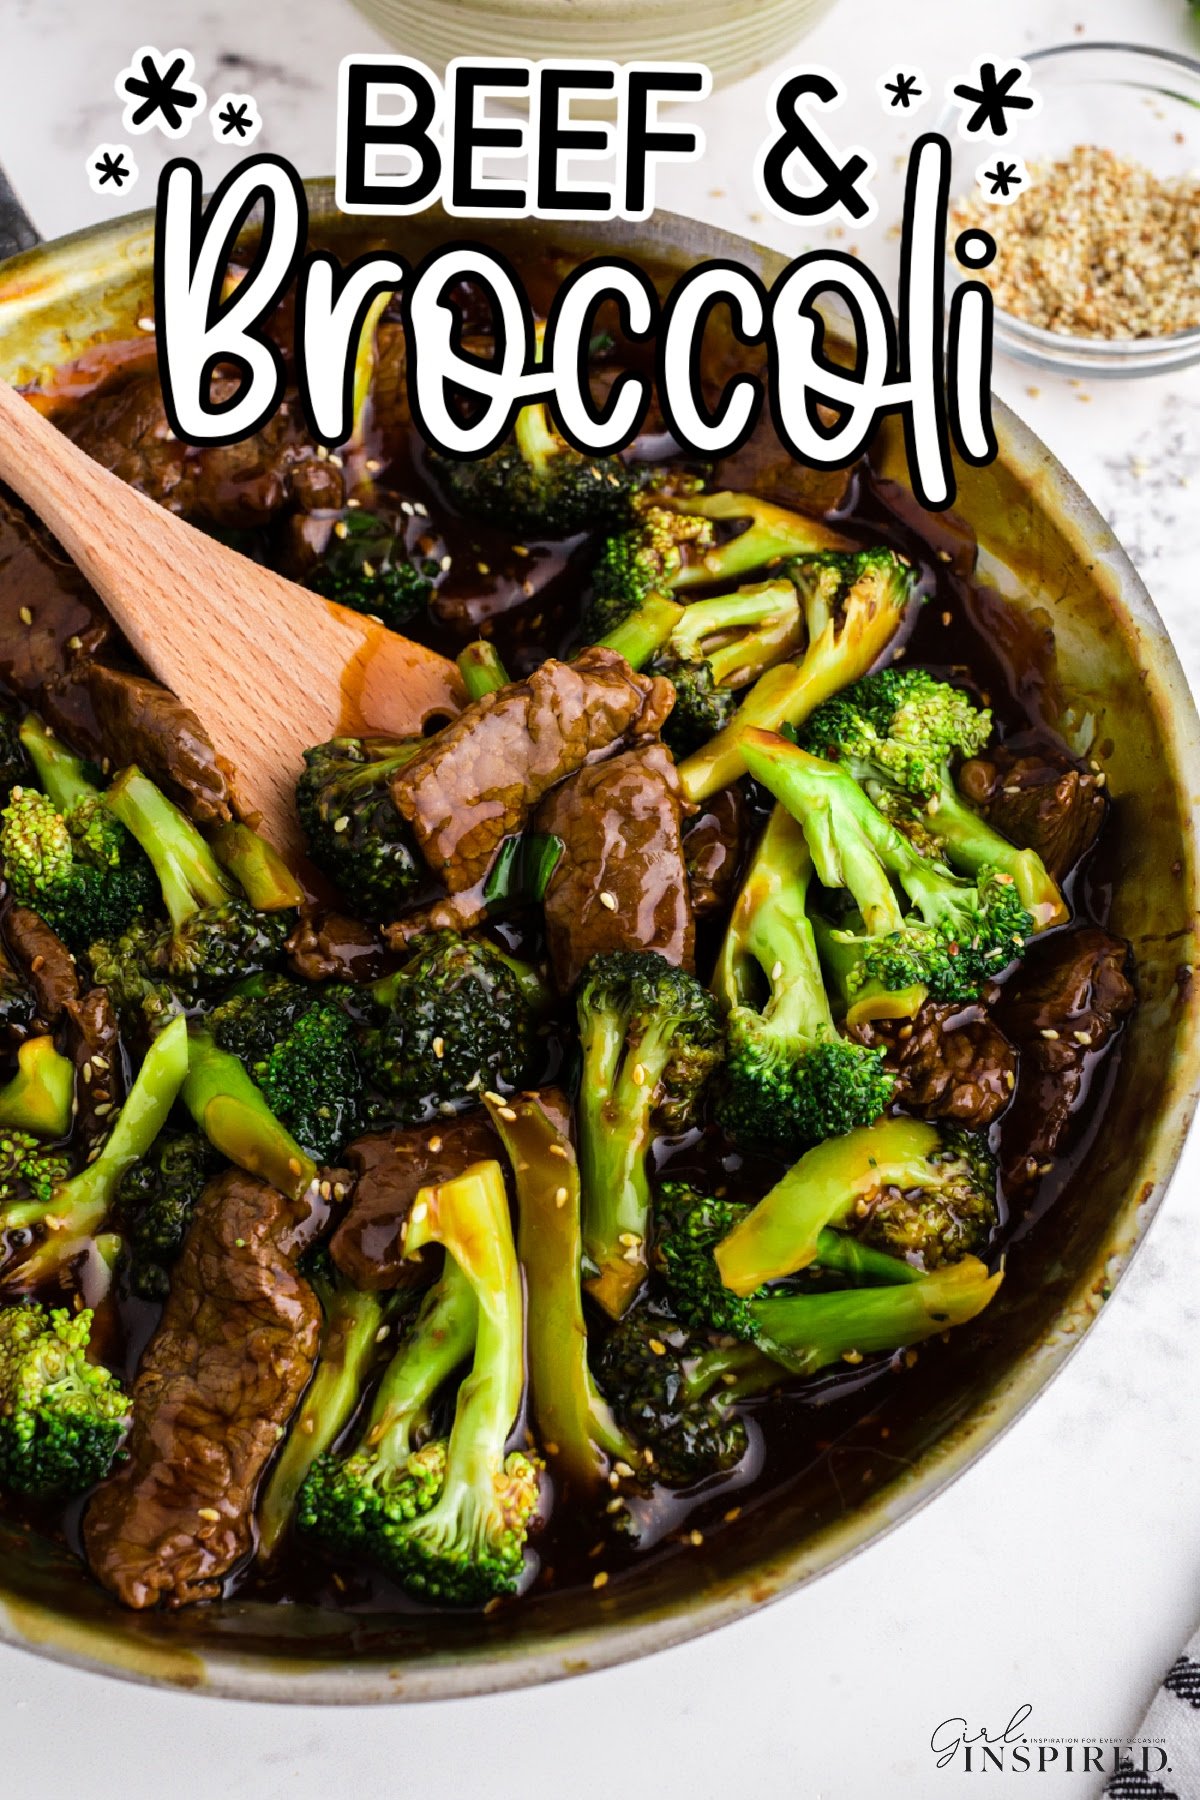 Panda Express beef and broccoli in skillet with wooden spatula lifting a scoop, with text overlay.